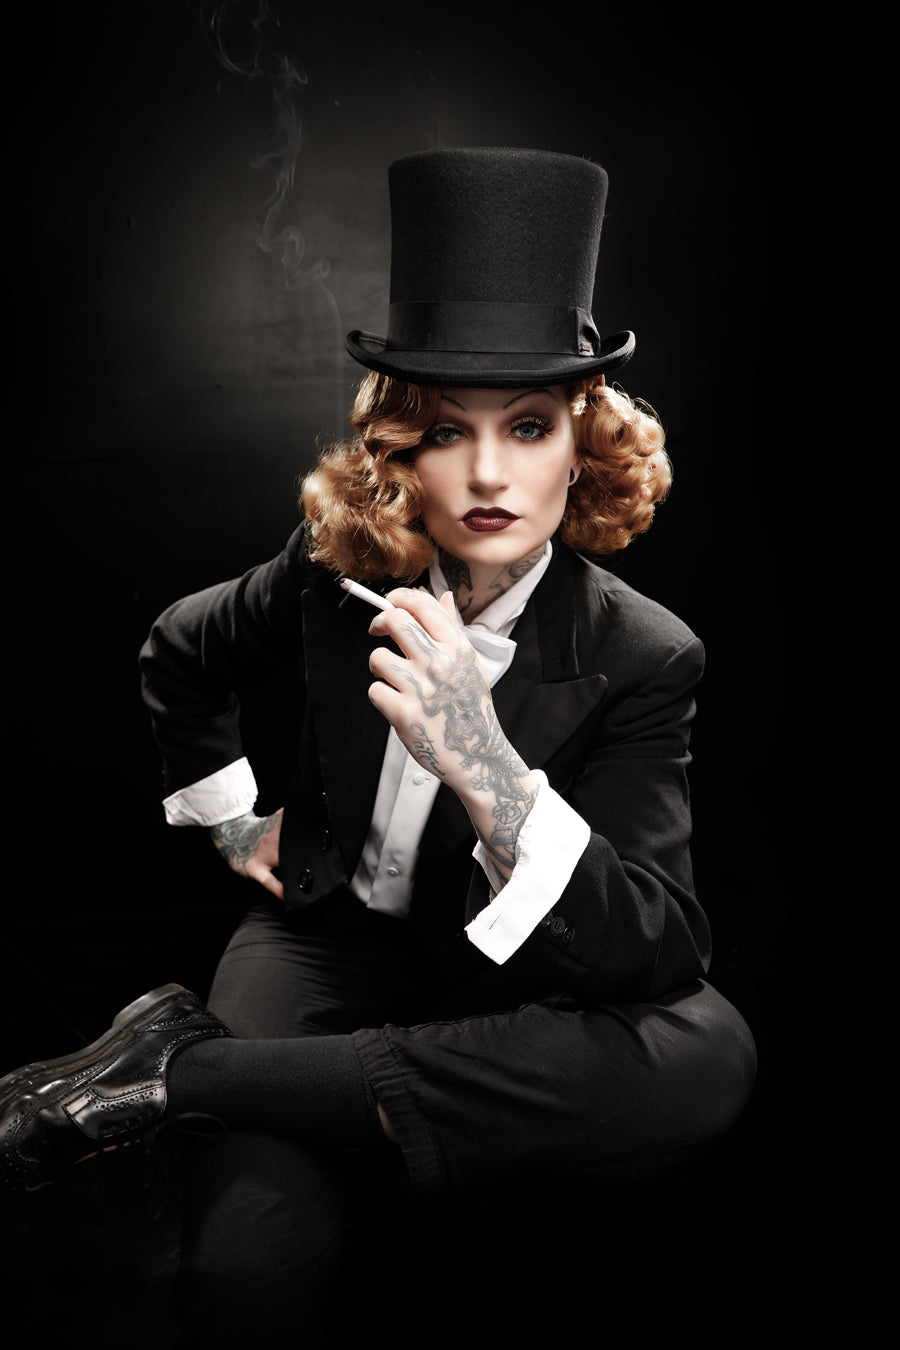 Marlene Dietrich 1930s Costume Hire or Cosplay, plus Makeup and Photography. Proudly by and available at, Little Shop of Horrors Costumery 6/1 Watt Rd Mornington & Melbourne